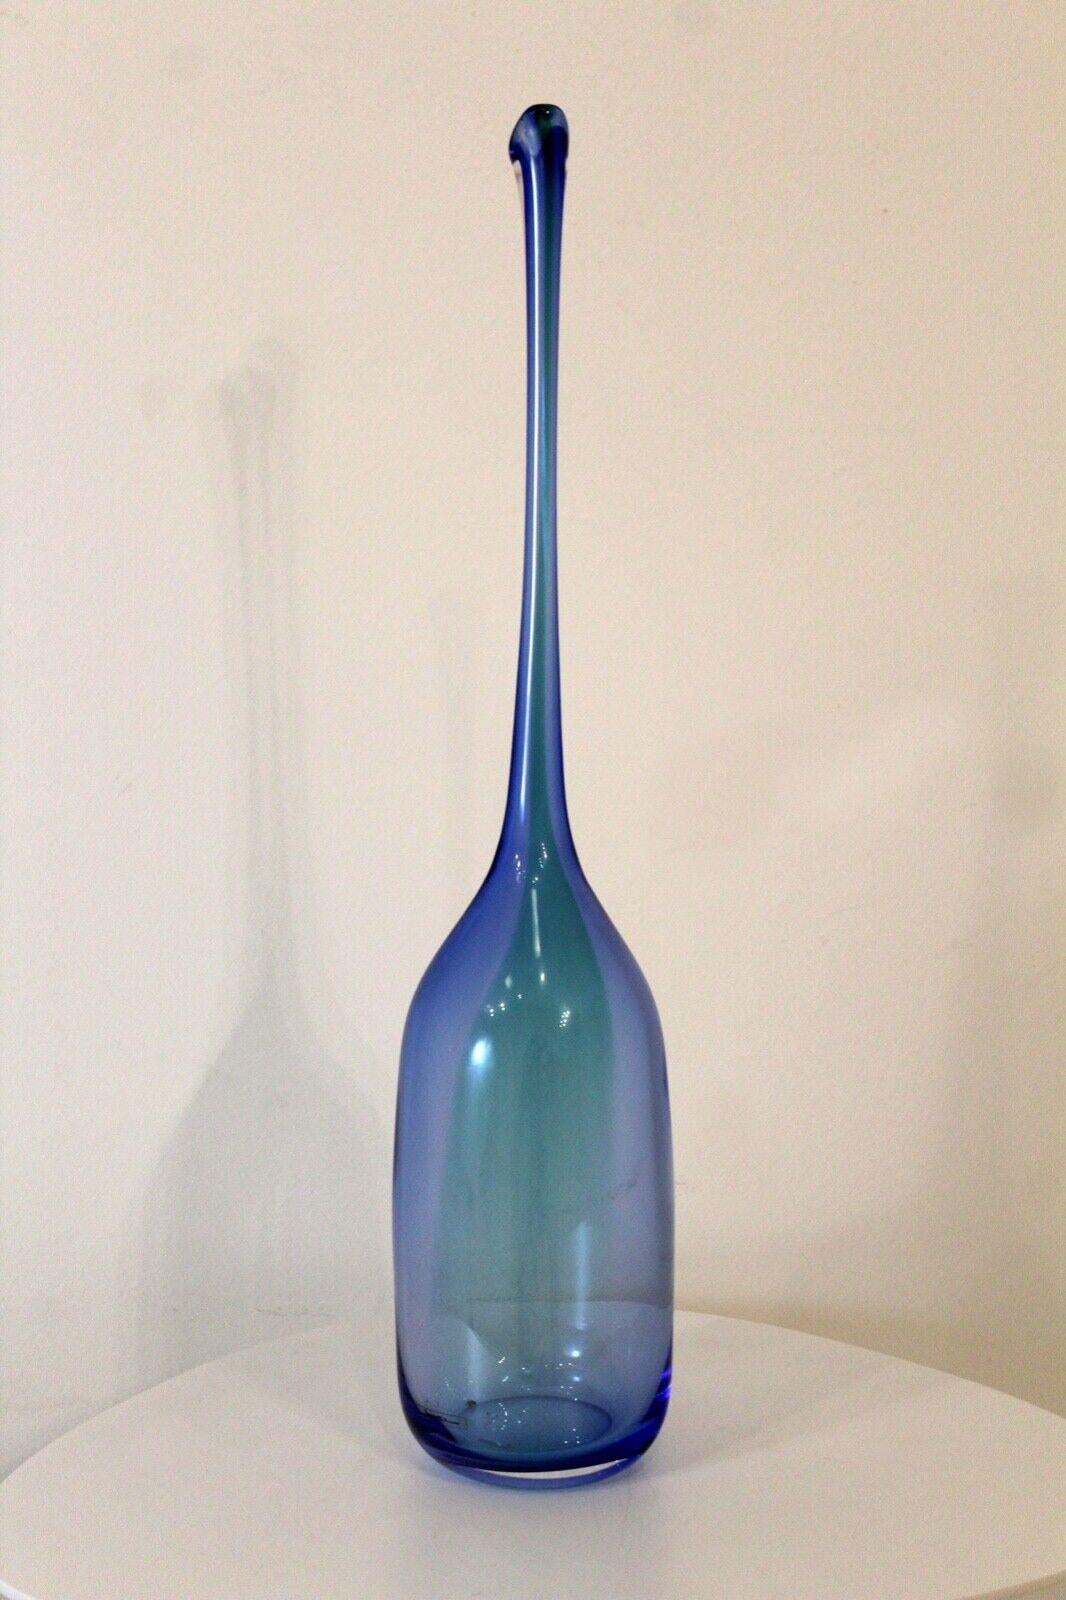 For your consideration is this show stopping blue glass vessel by Nouvel. Dimensions: 4.5 diameter x 22.25 height.
    